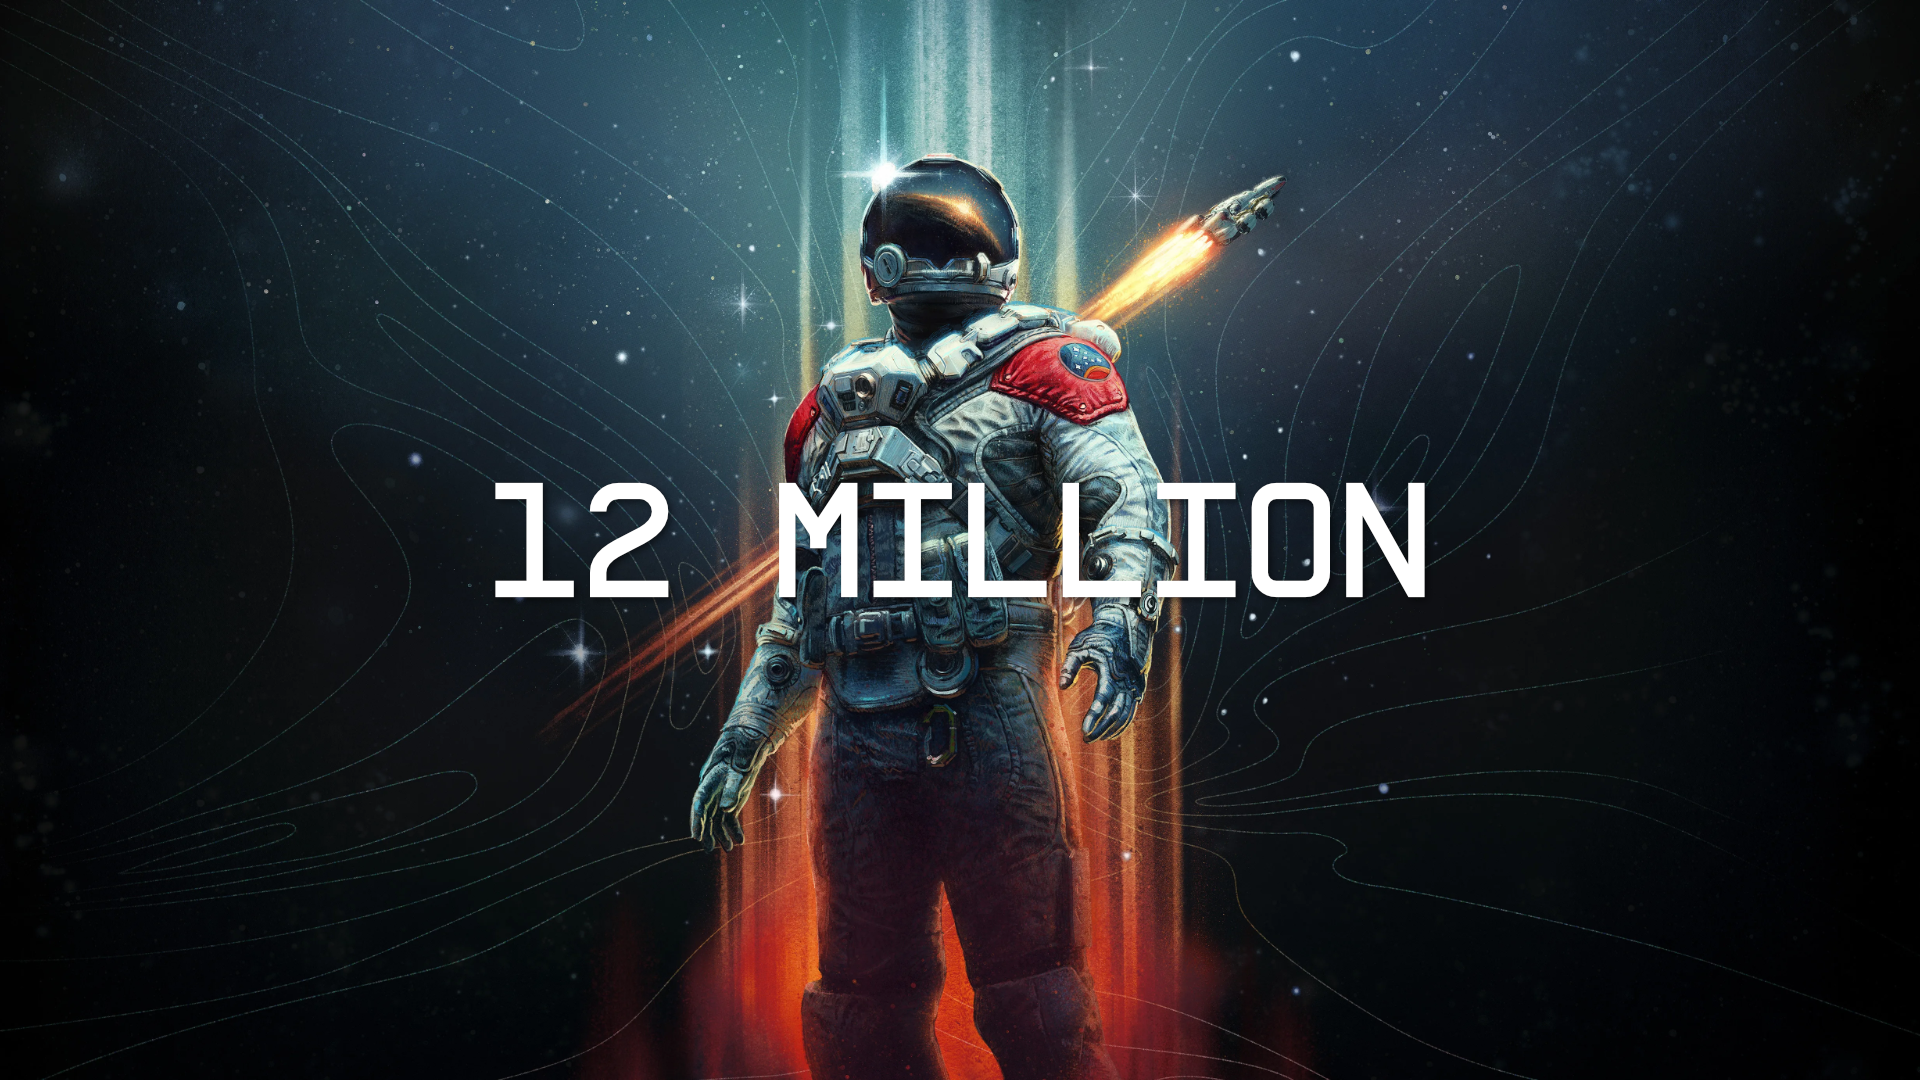 Beast Of Truth on X: Not only has Starfield achieved 12 MILLION